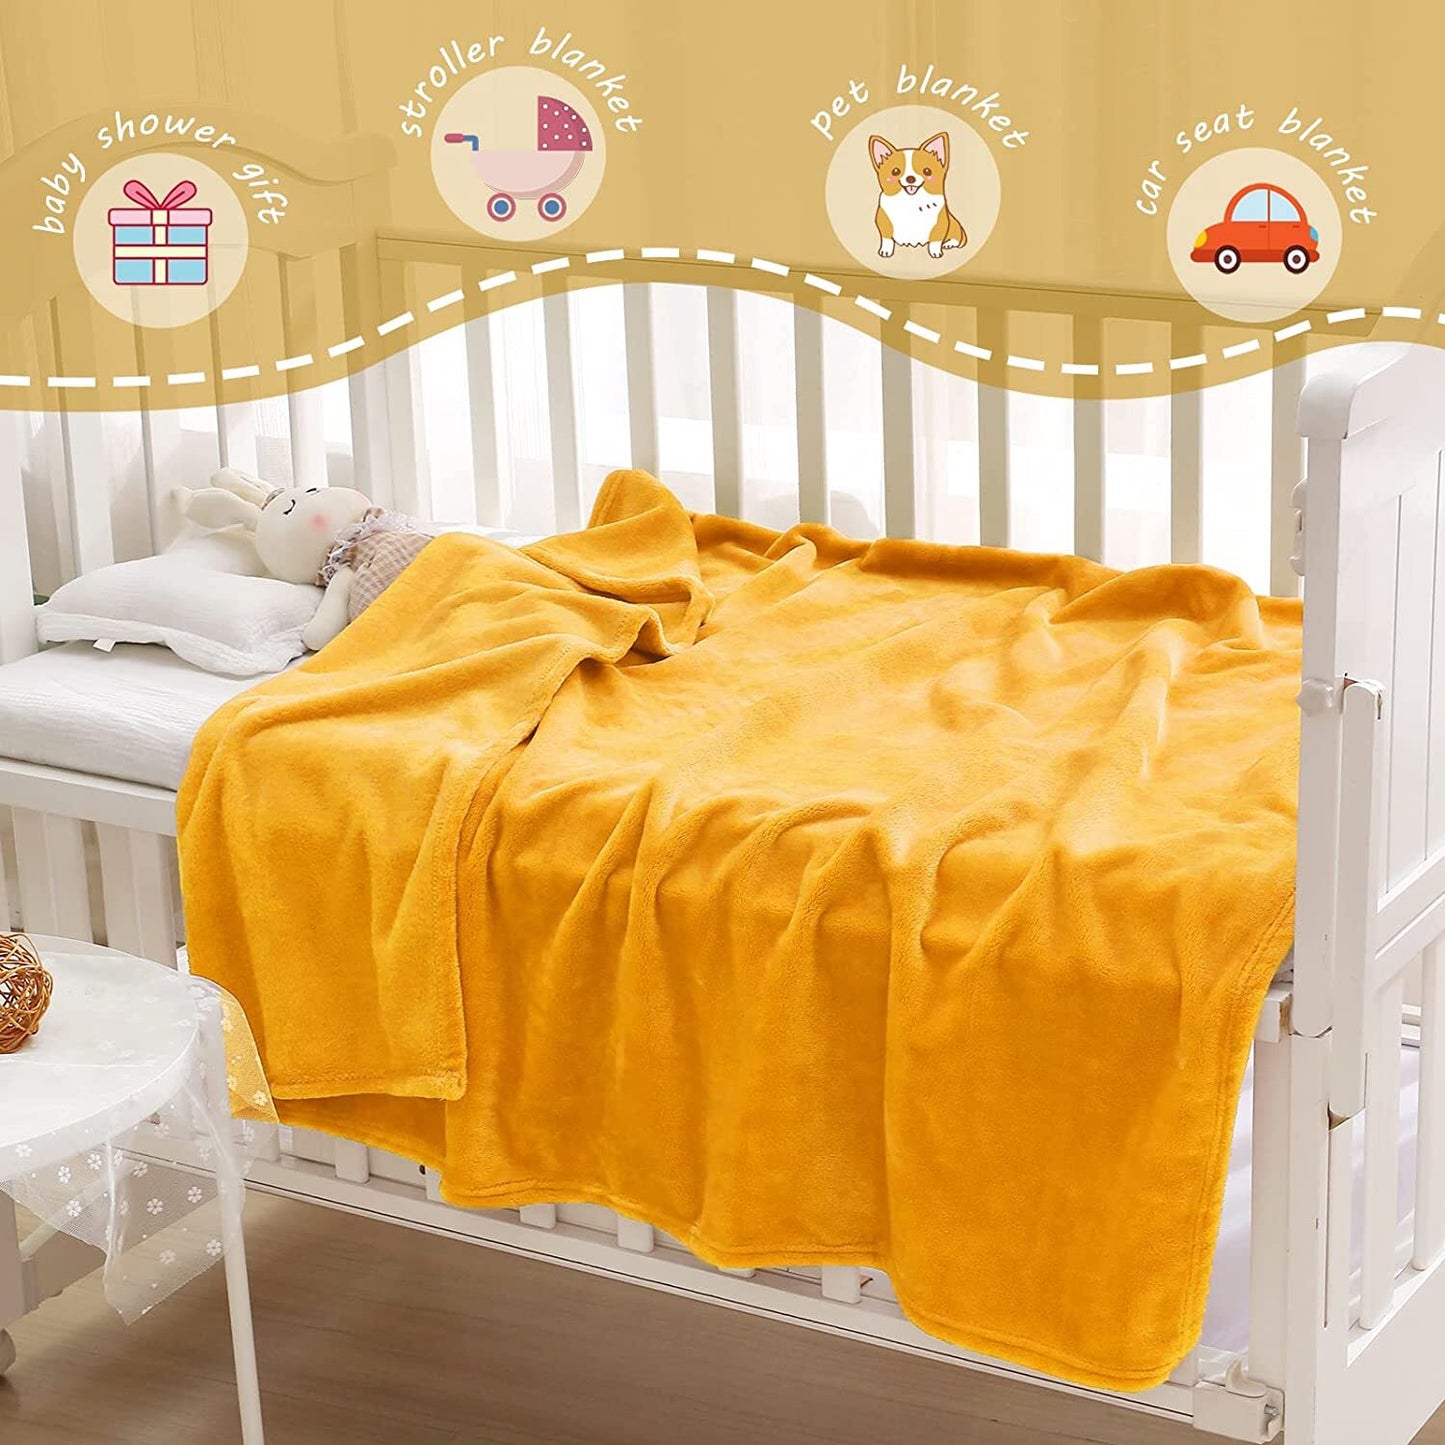 Exclusivo Mezcla Soft Lightweight Fleece Baby Blanket Throw Blanket for Boys, Girls, Toddler and Kids Nap Blankets for Crib Bedding, Nursery, and Security (40x50 inches, Mustard Yellow)